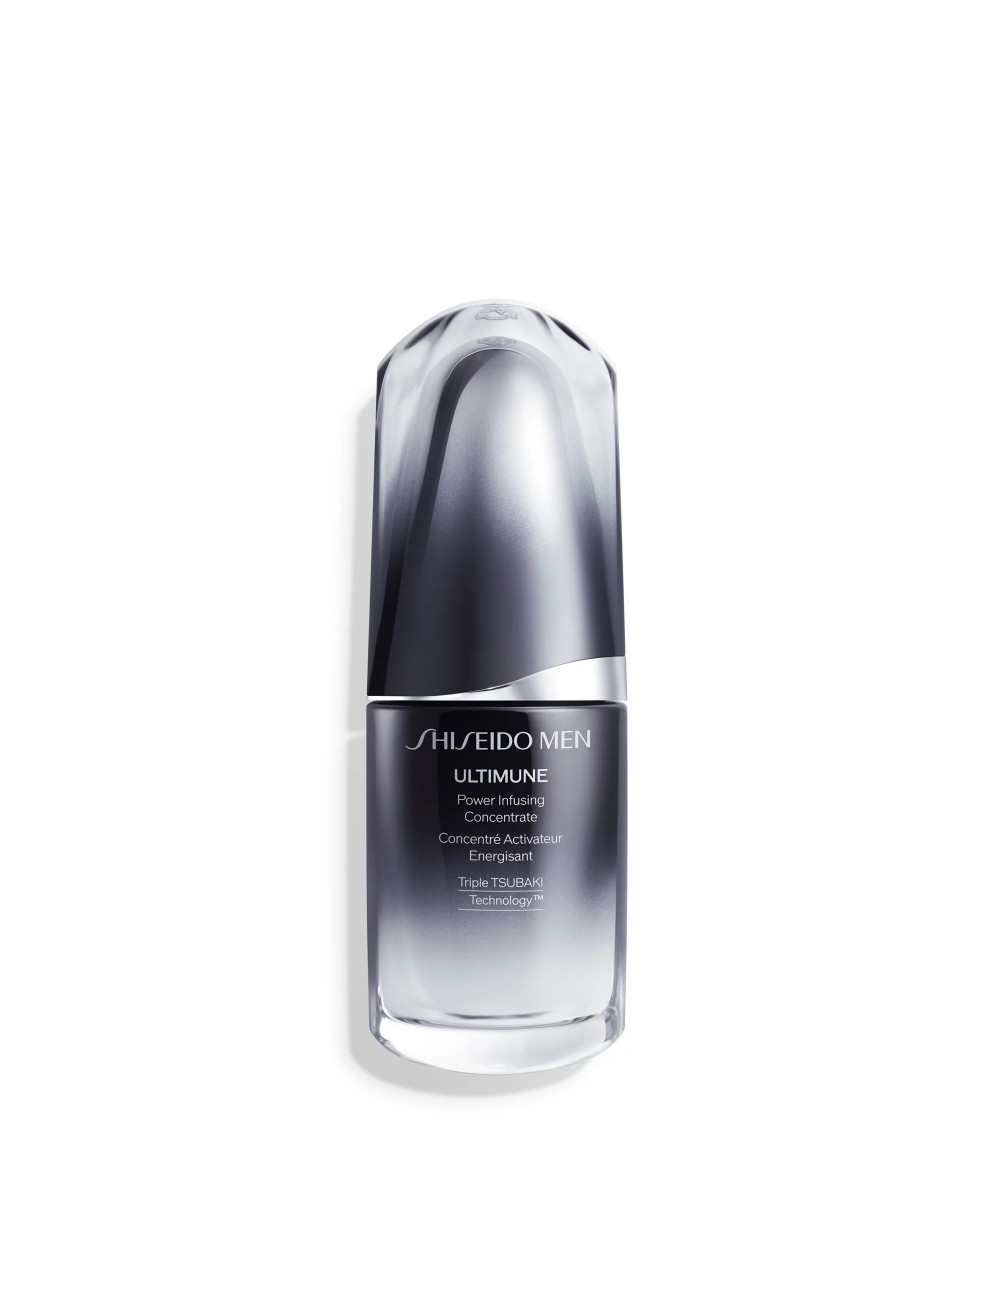 MEN ULTIMUNE power infusing concentrate 30 ml